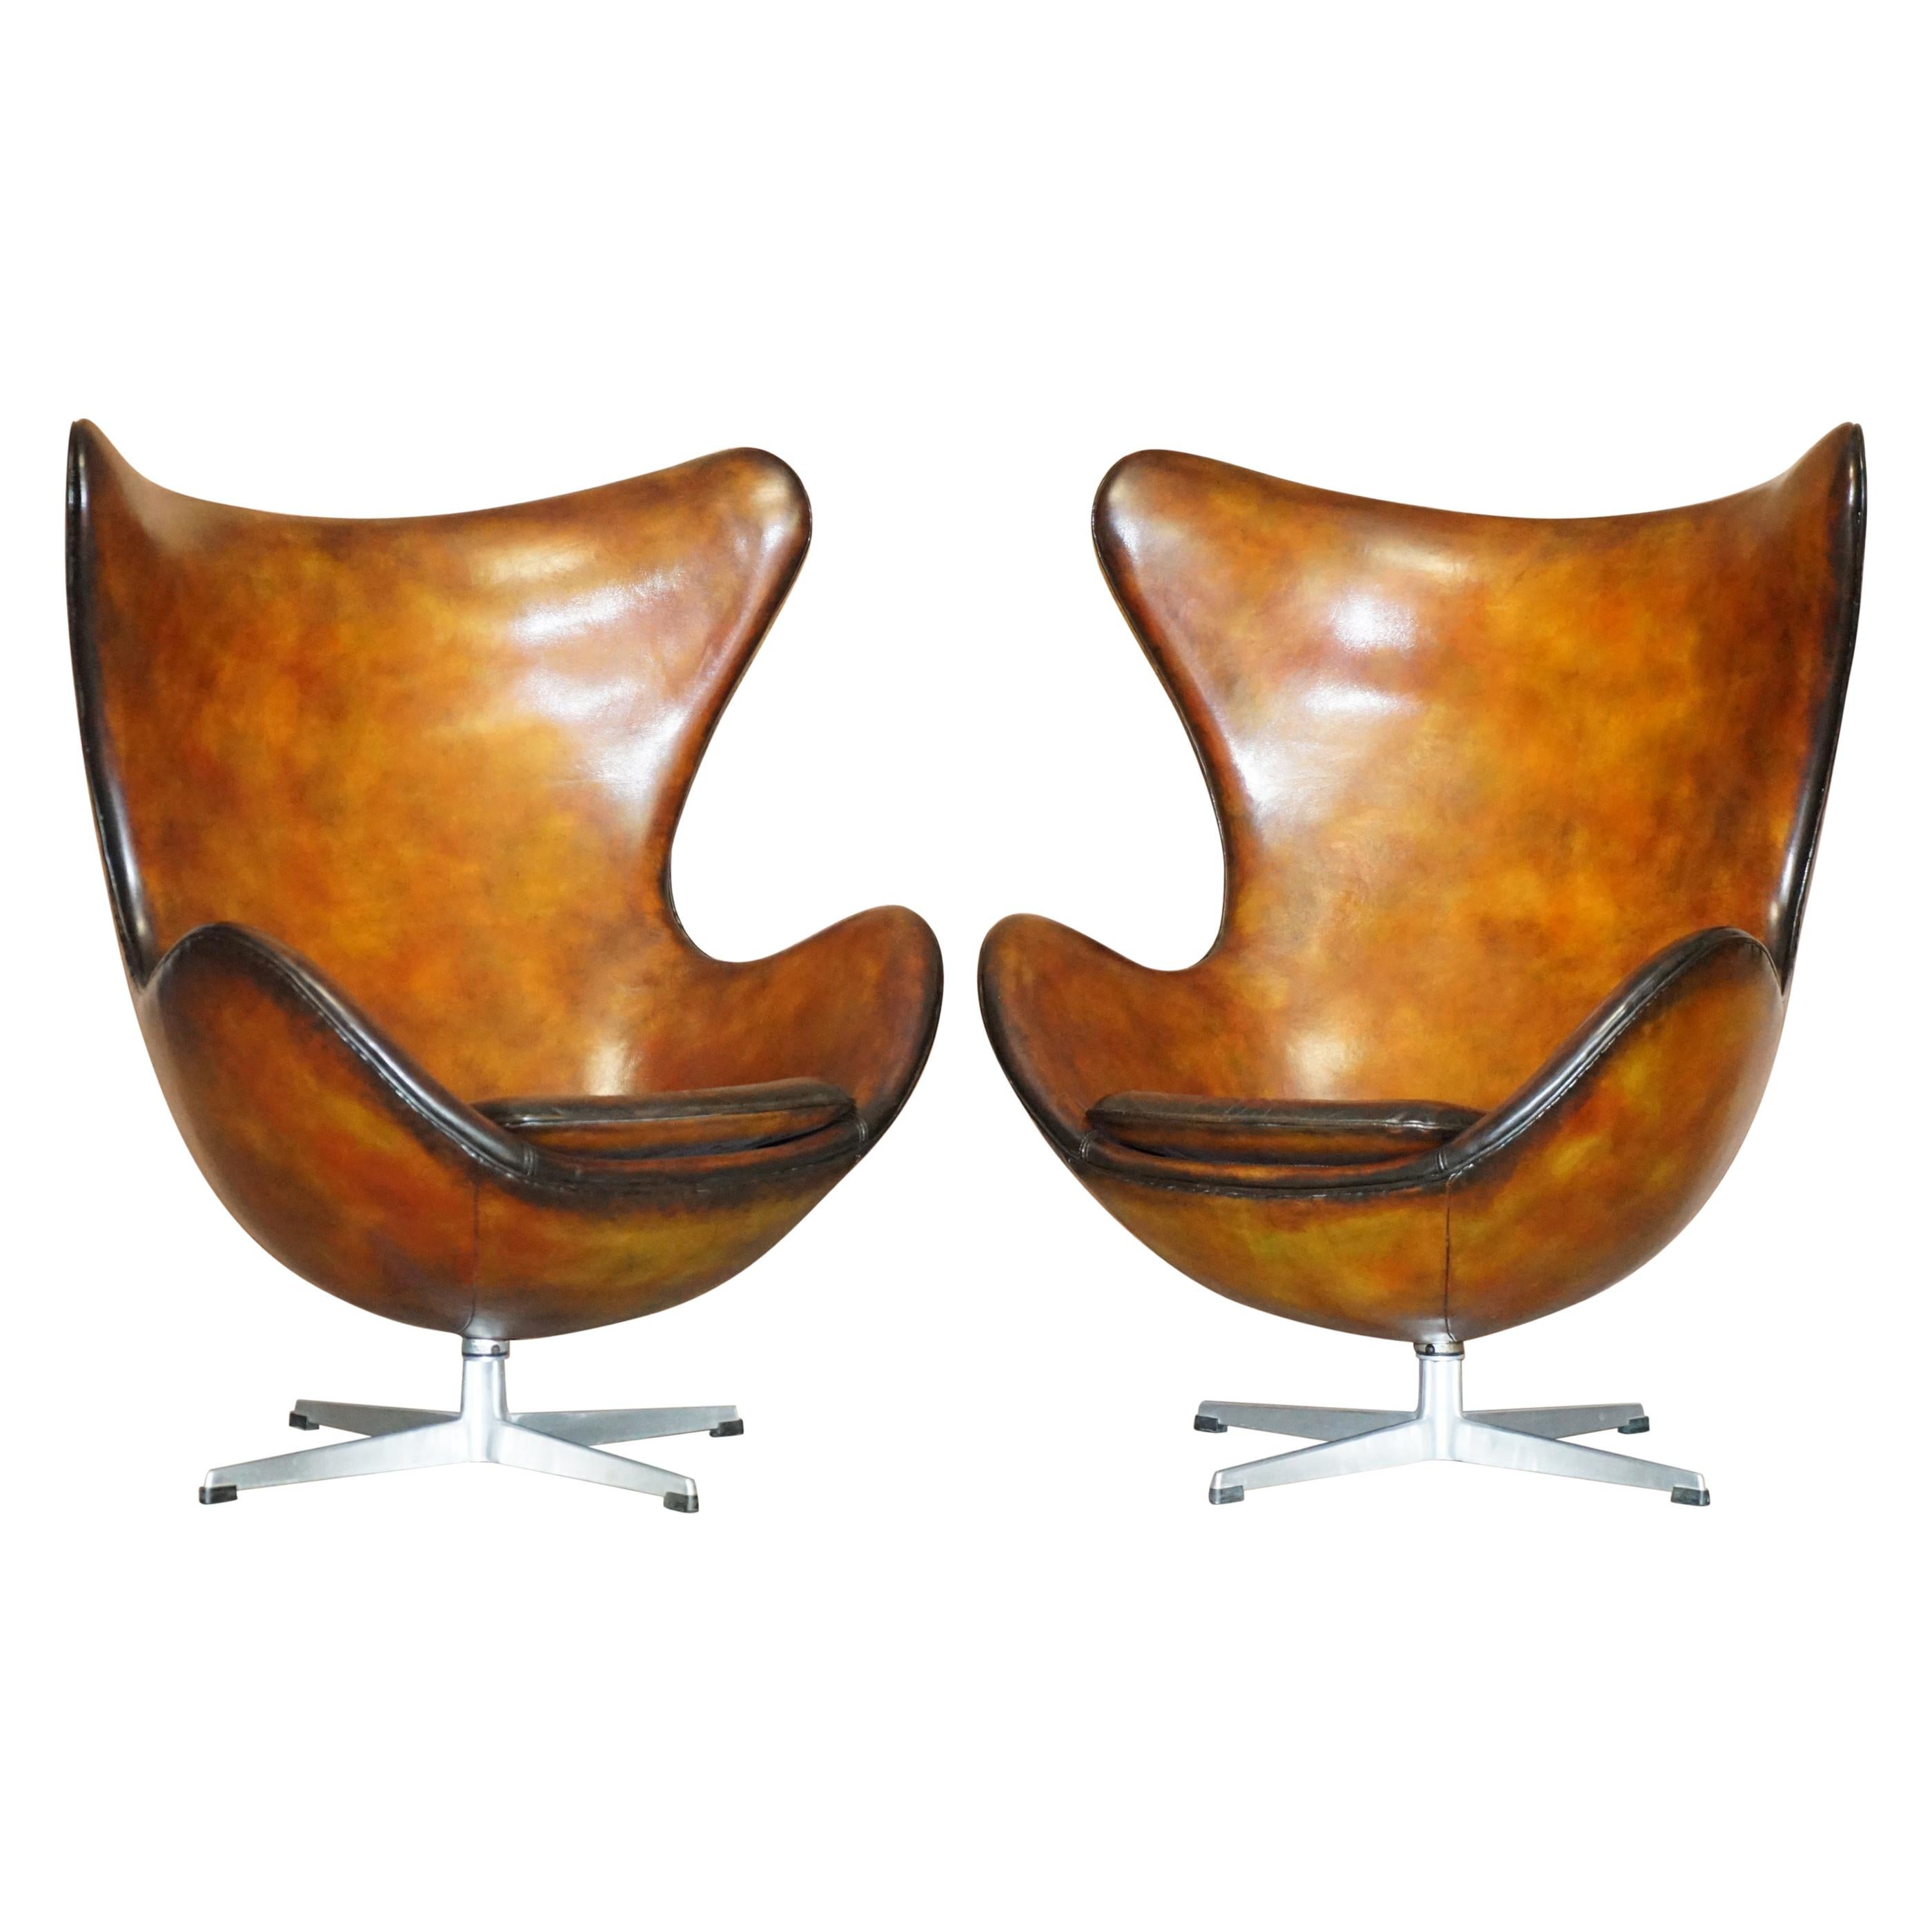 Pair of Totally Restored Original 1963 Fully Stamped Fritz Hansen Egg Chairs